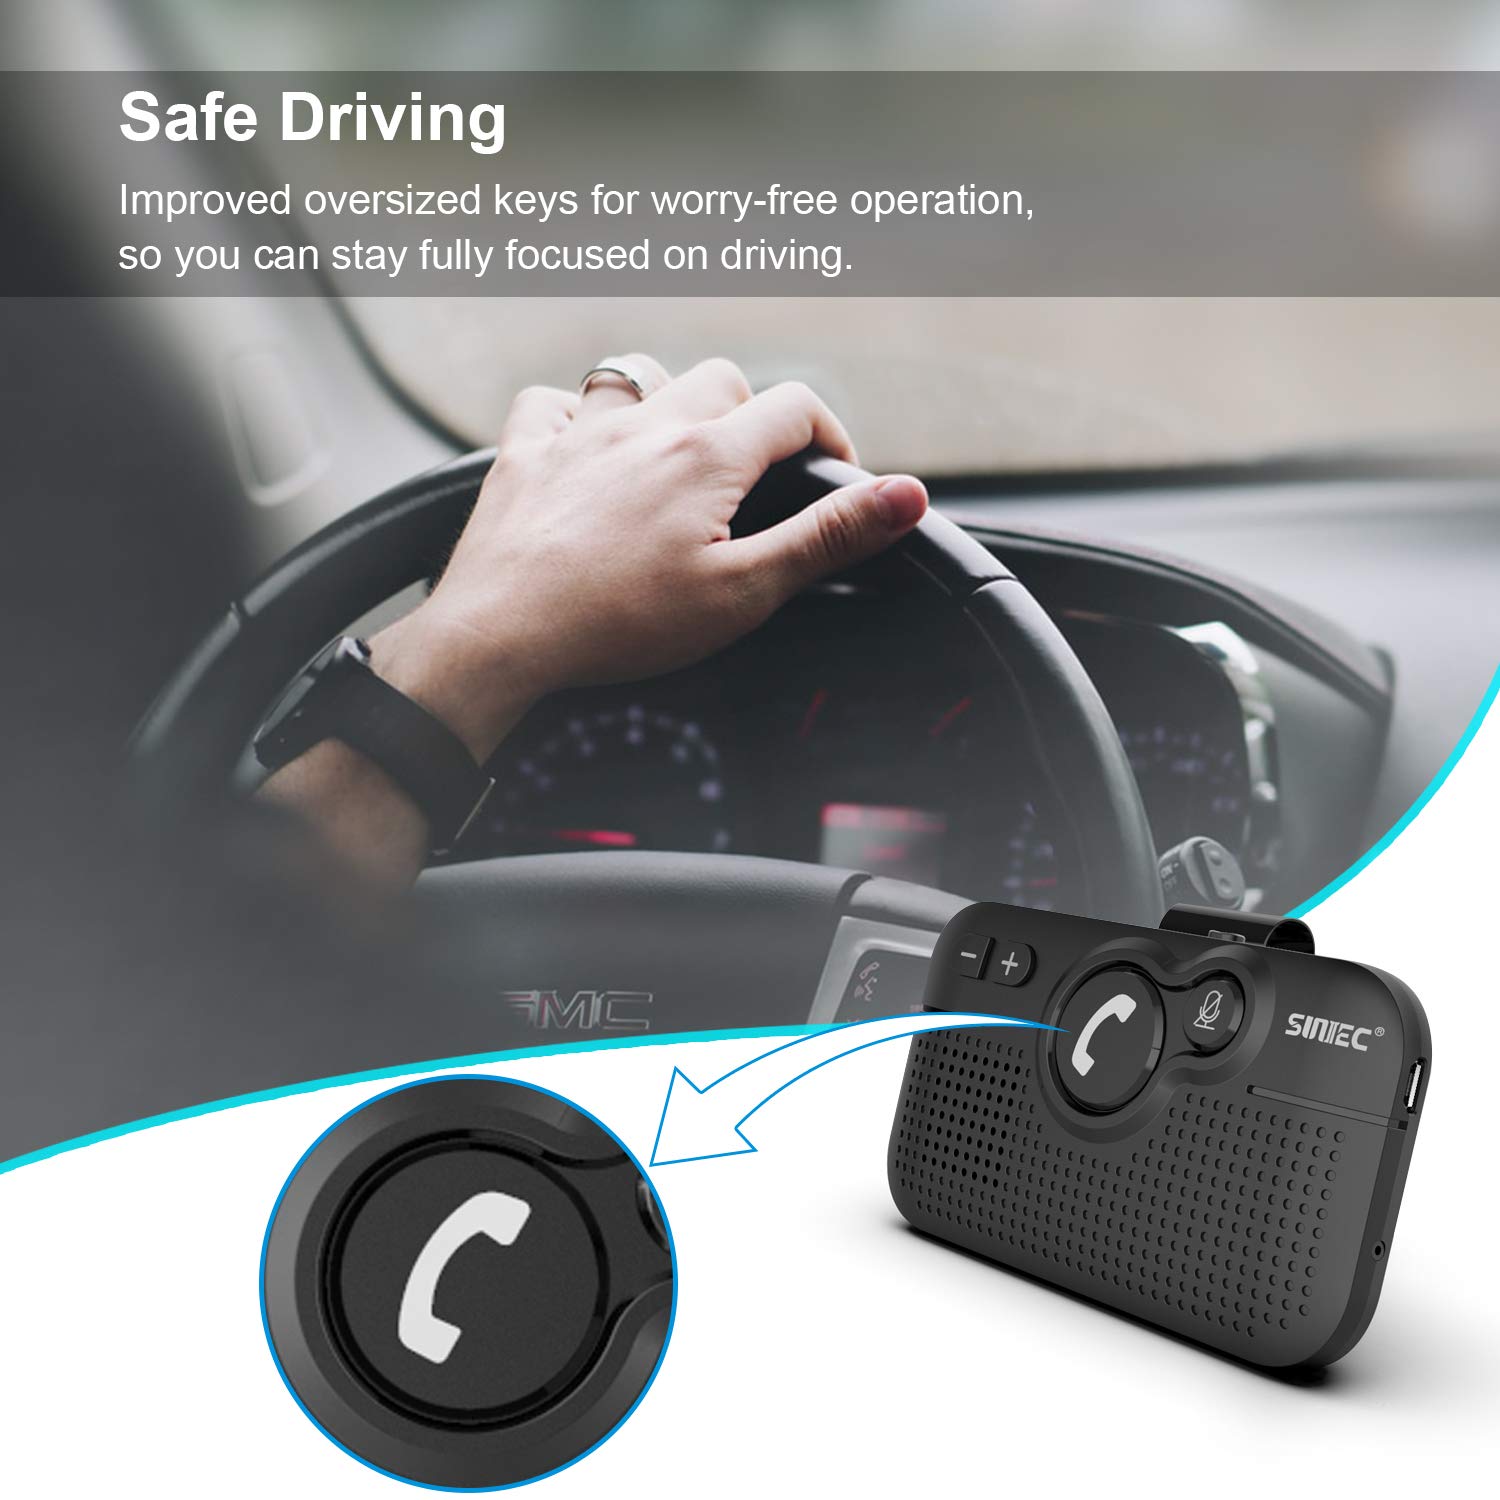 SUNITEC Car Bluetotoh Speaker for Phone: BC980SA Multipoint Hands Free in car Calling Speaker for Safe Driving - with 2pcs 5ft Type-C Fast Charging Data Cable